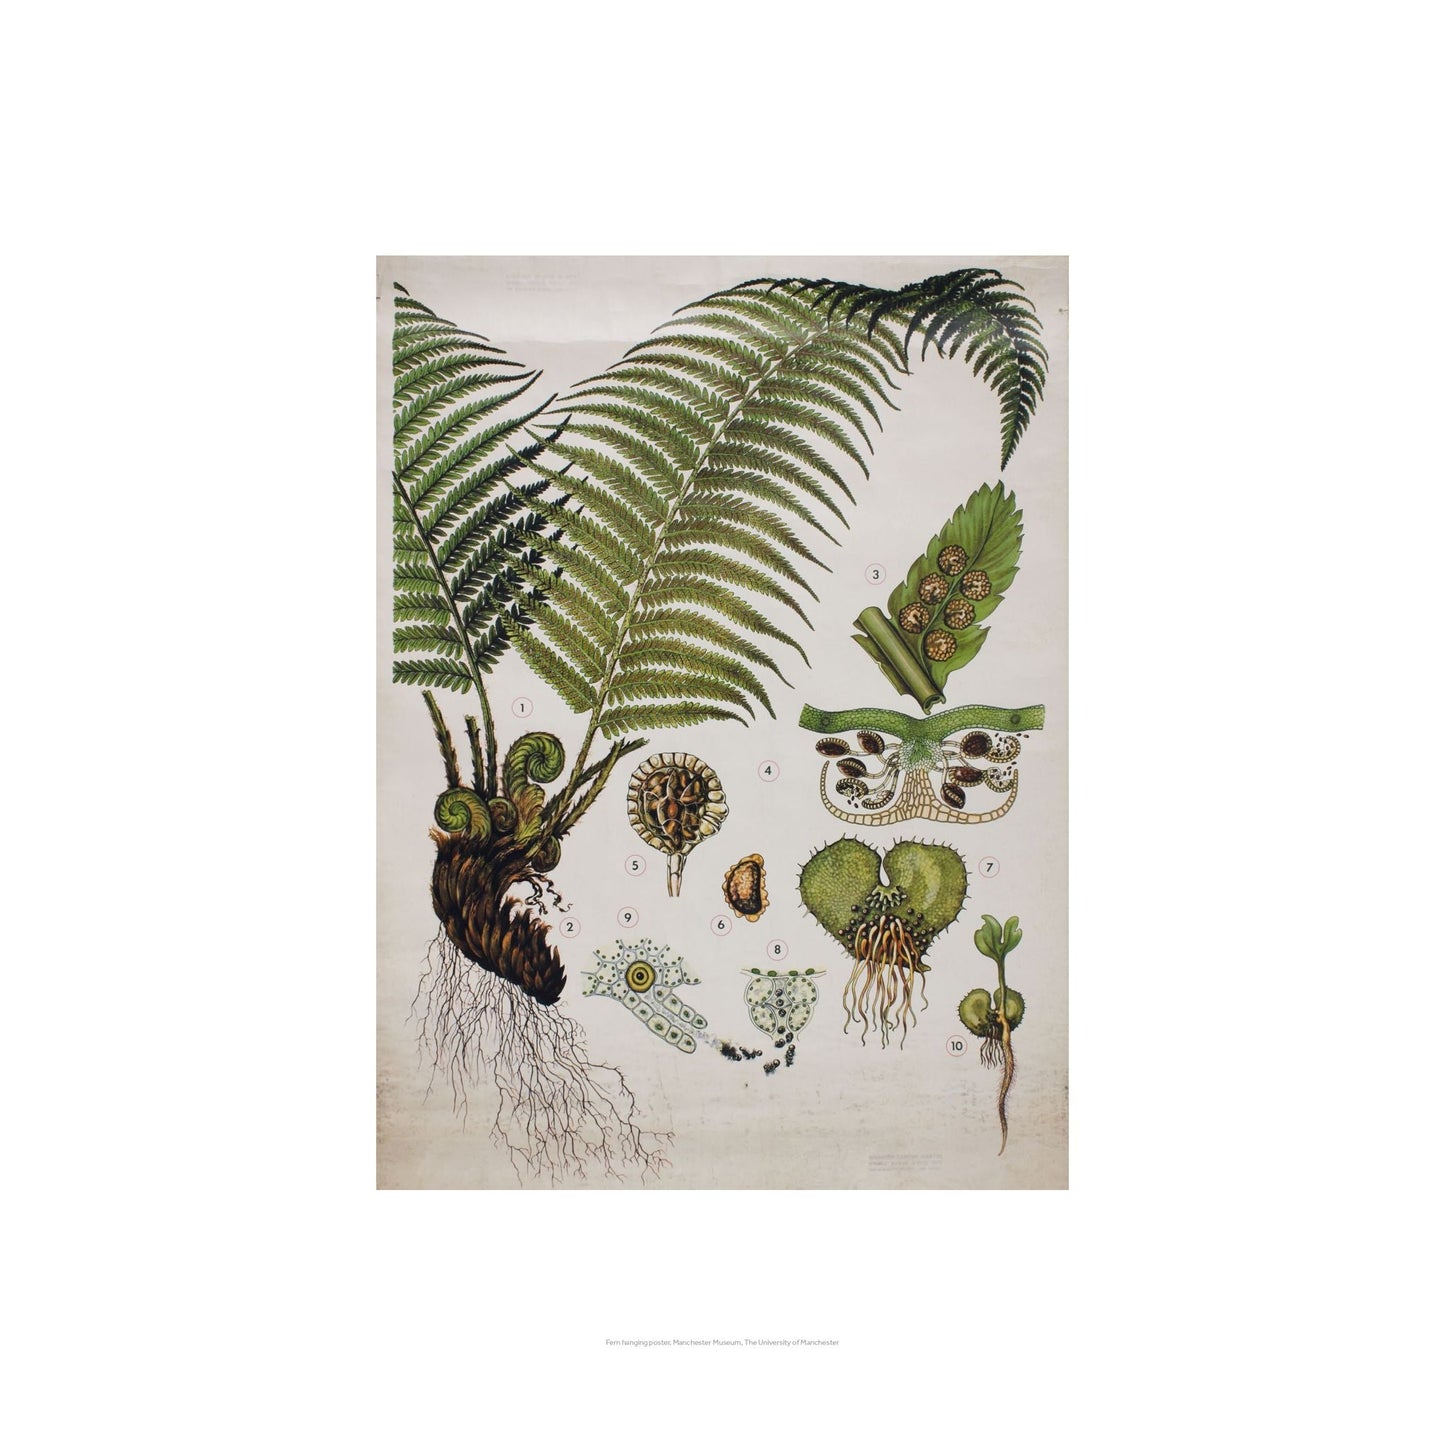 Beige print with the 1897 illustration of a fern and the fruiting bodies.